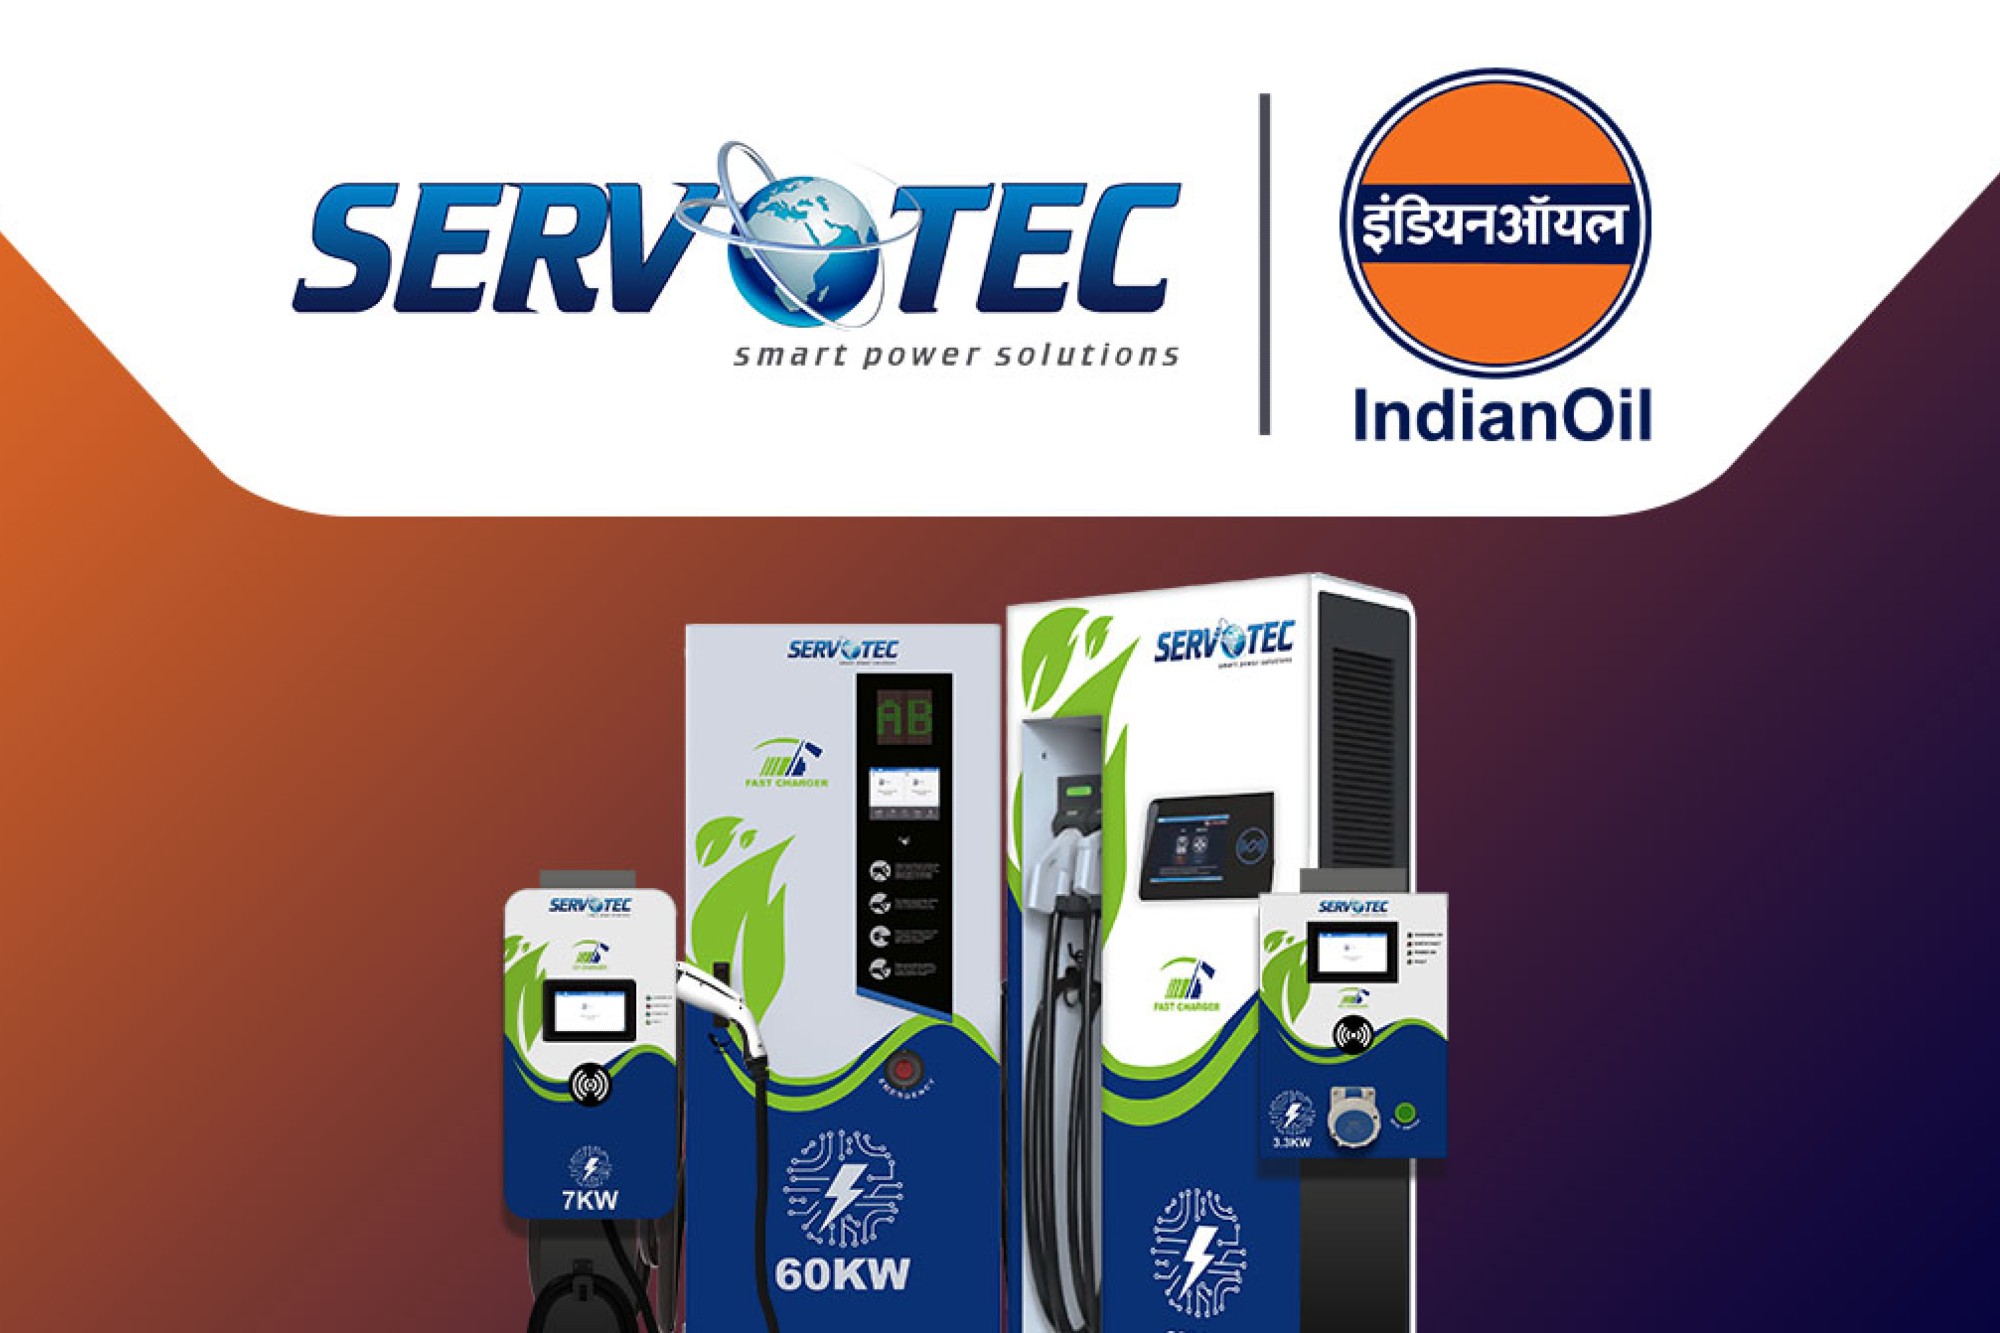 Servotech seals ₹ 111 crore deal for 1400 DC fast EV chargers